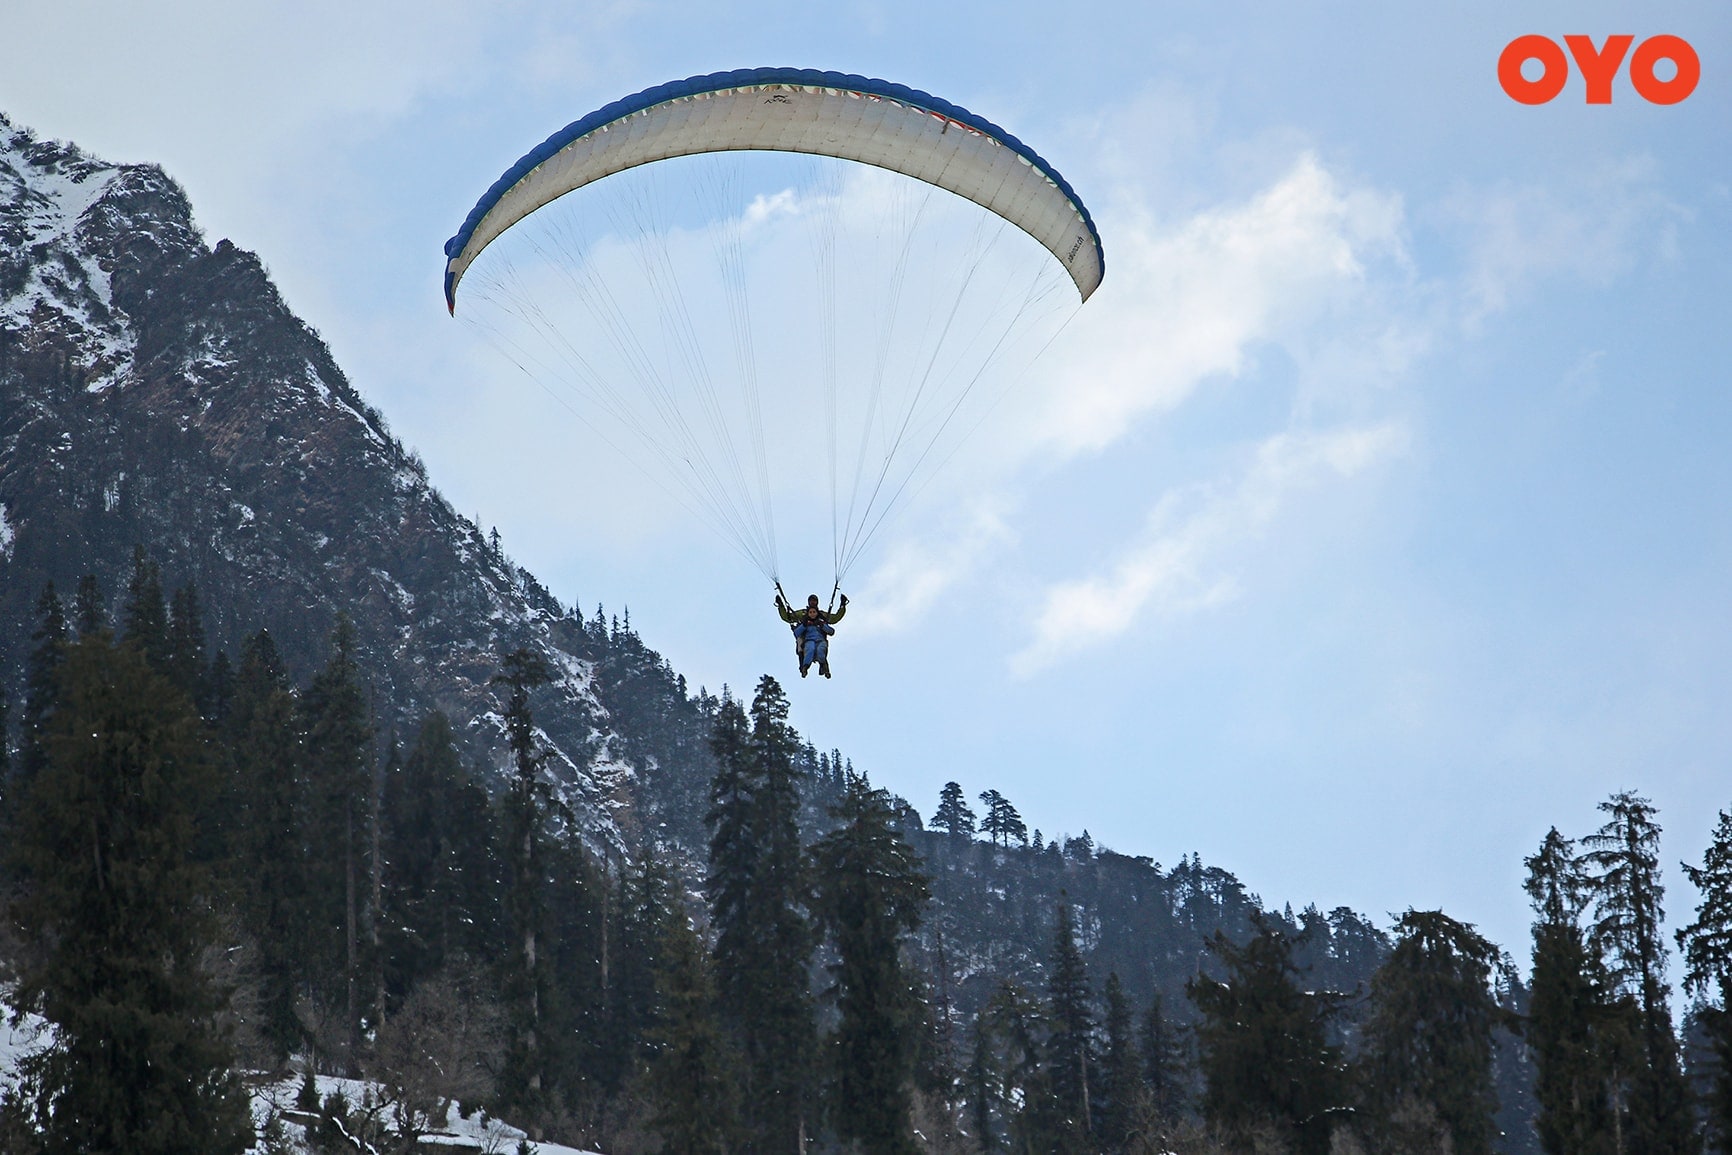 Manali - One of the most adventurous places in India